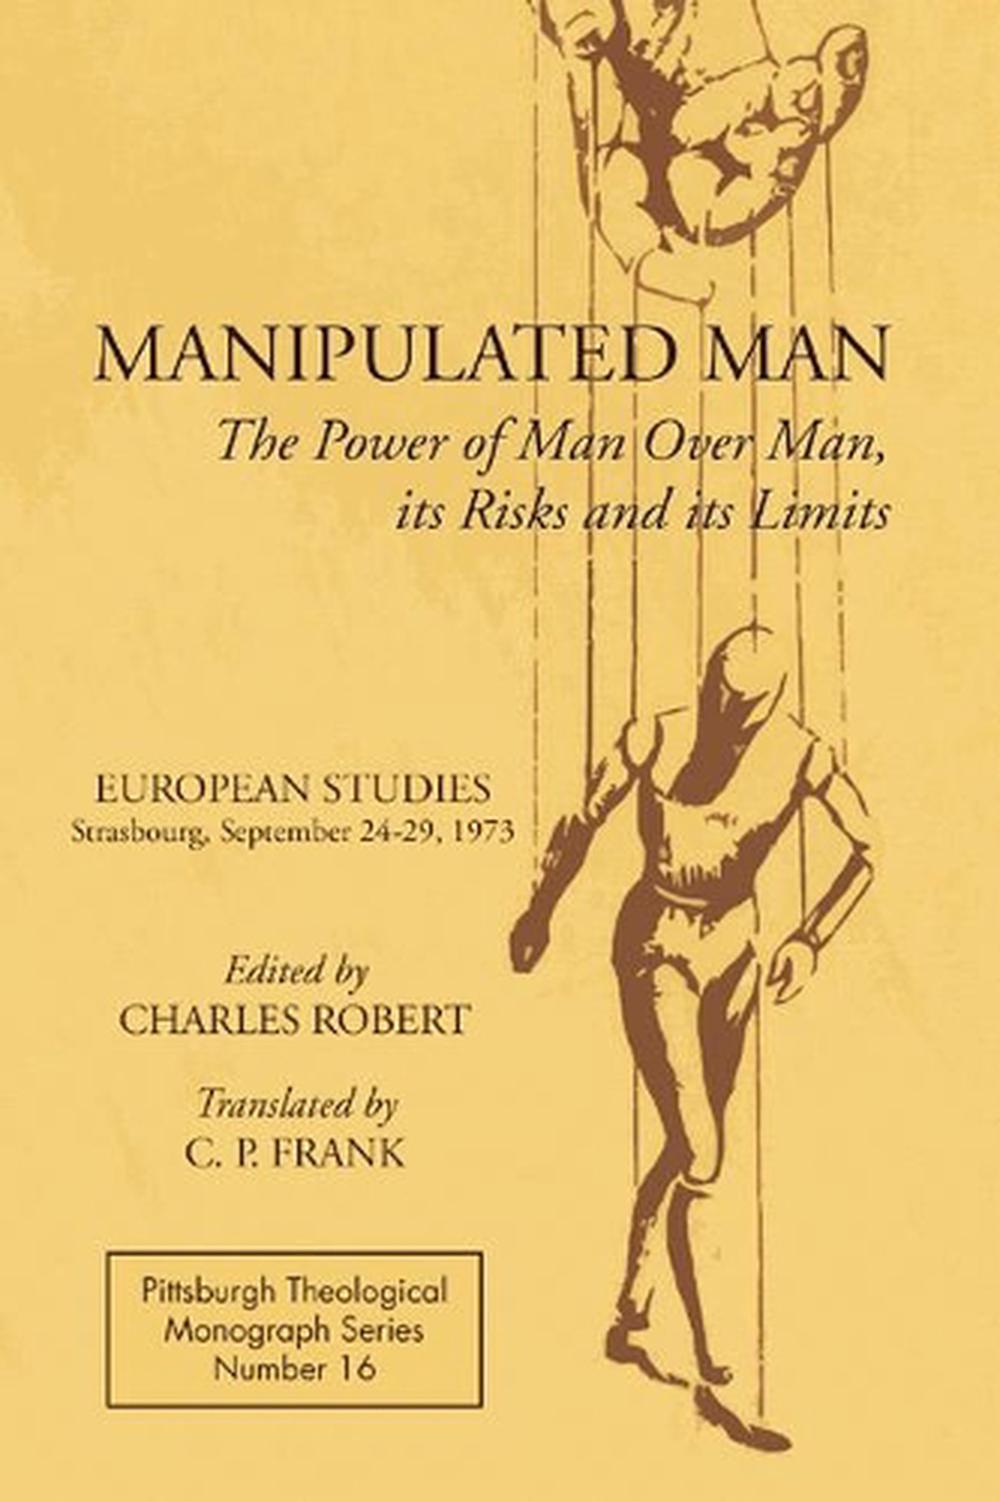 book the manipulated man